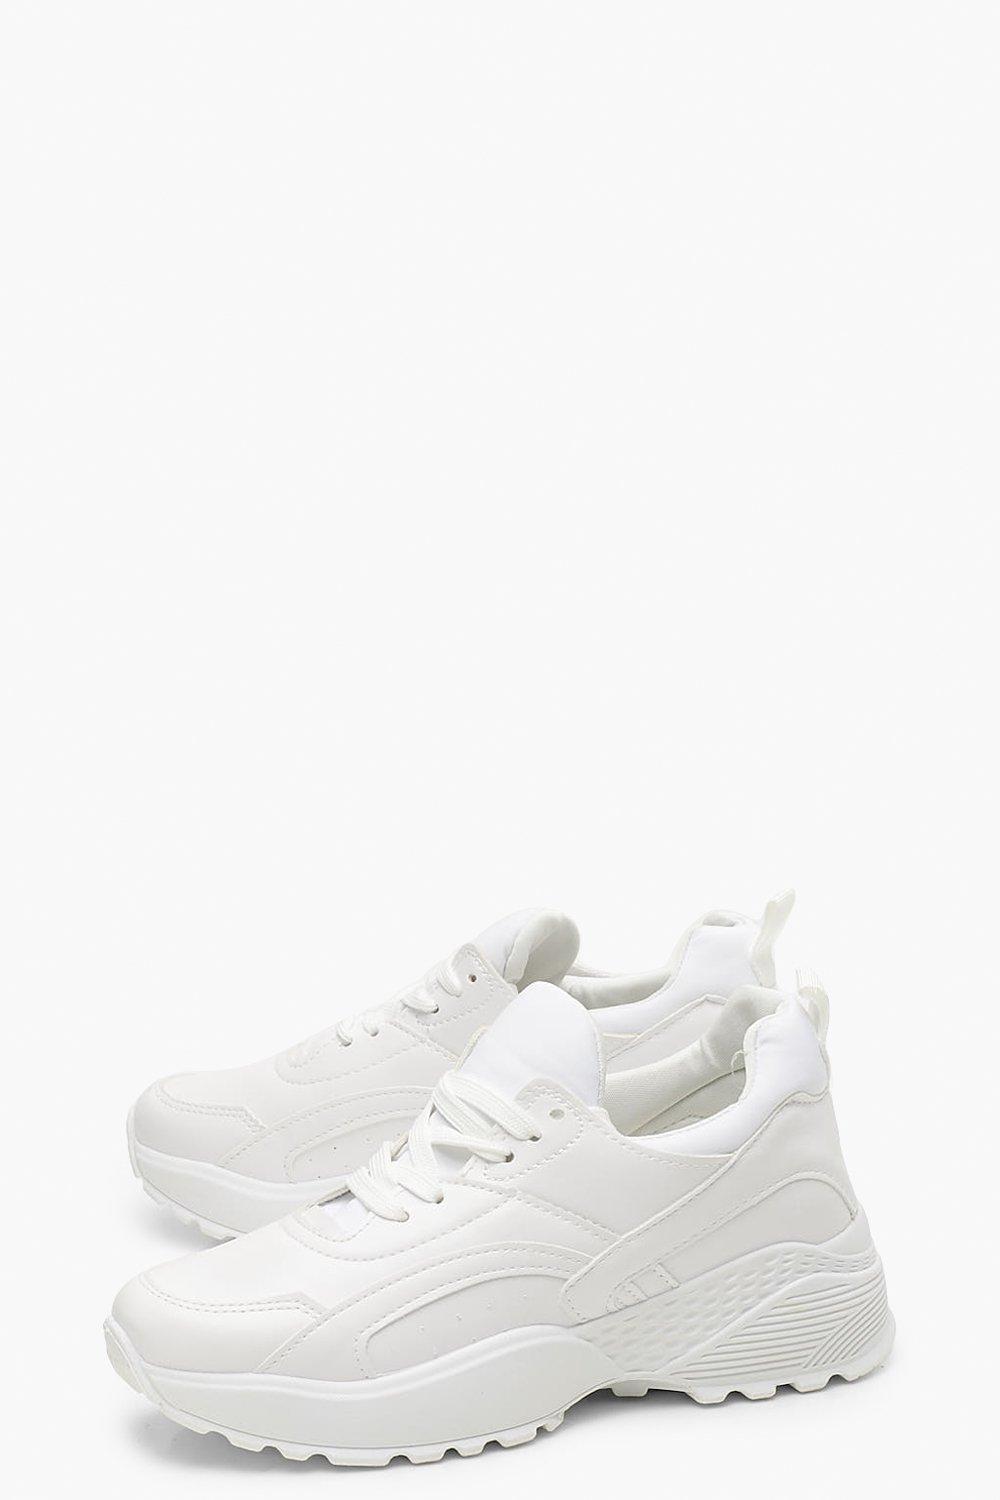 isabel marant kaisee sneakers